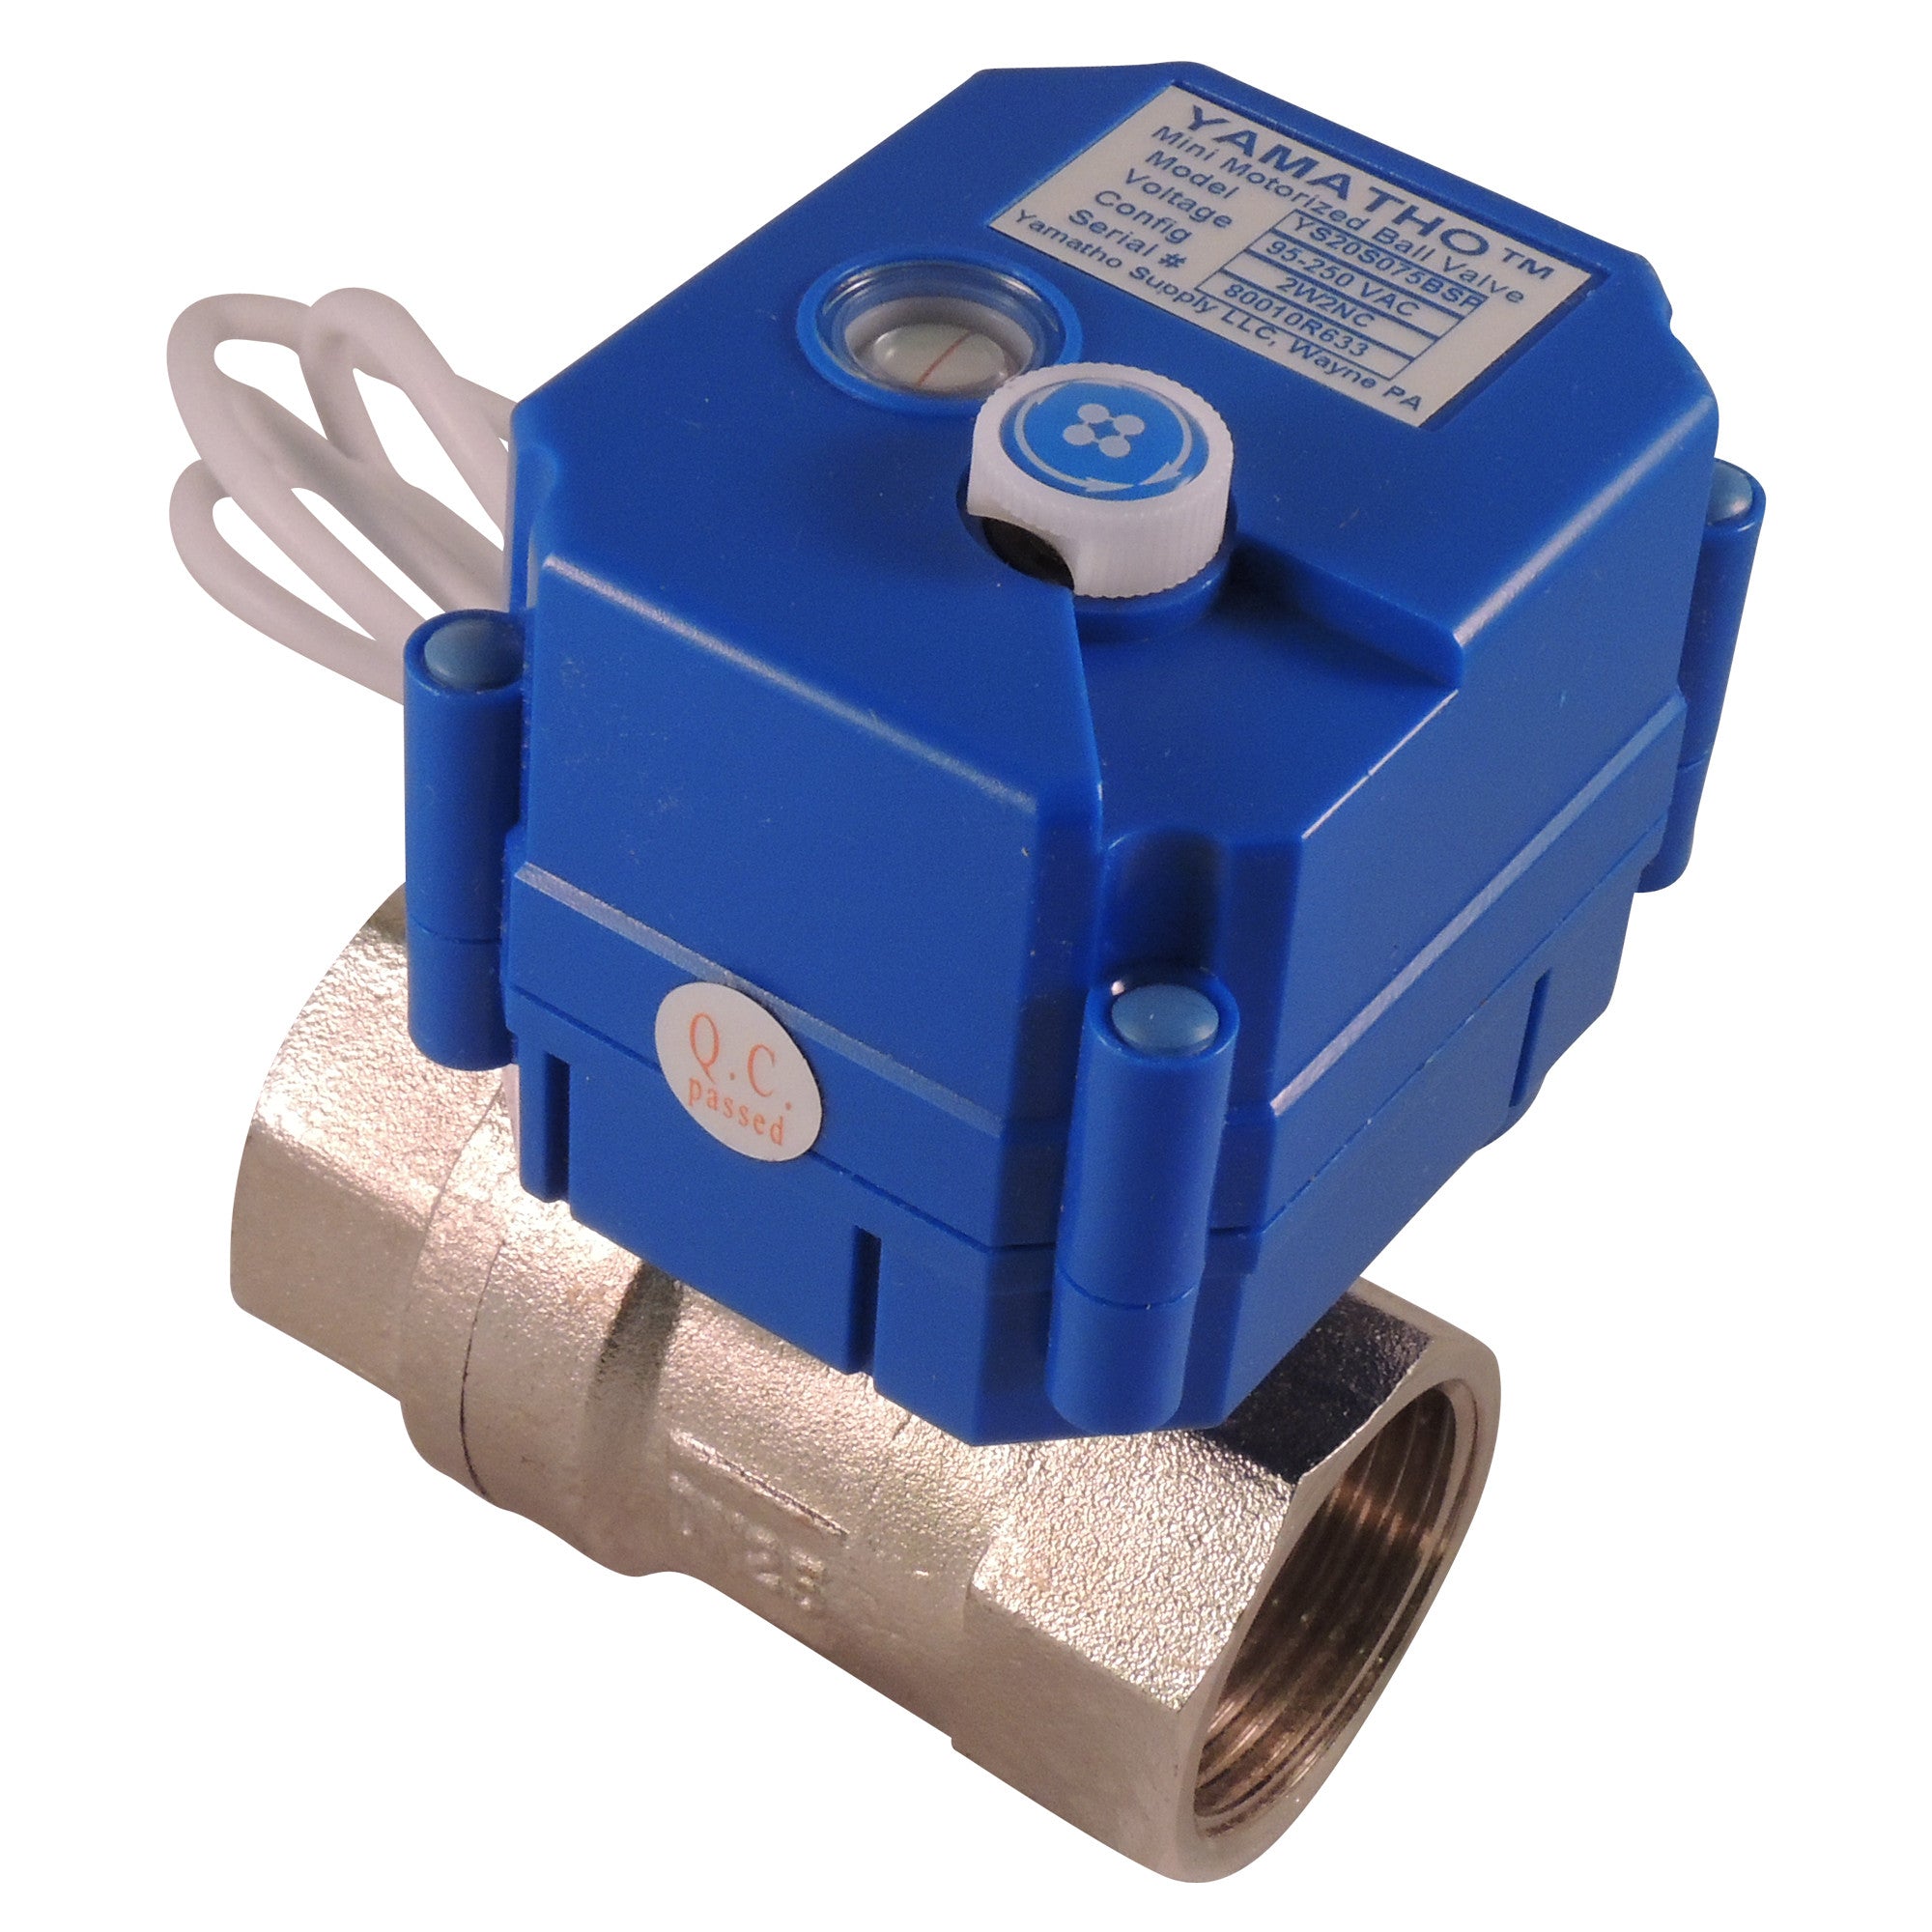 Electric motorized ball valve YS20S, 2 wires actuator 95-250 VAC Normally Open  #yamavalve